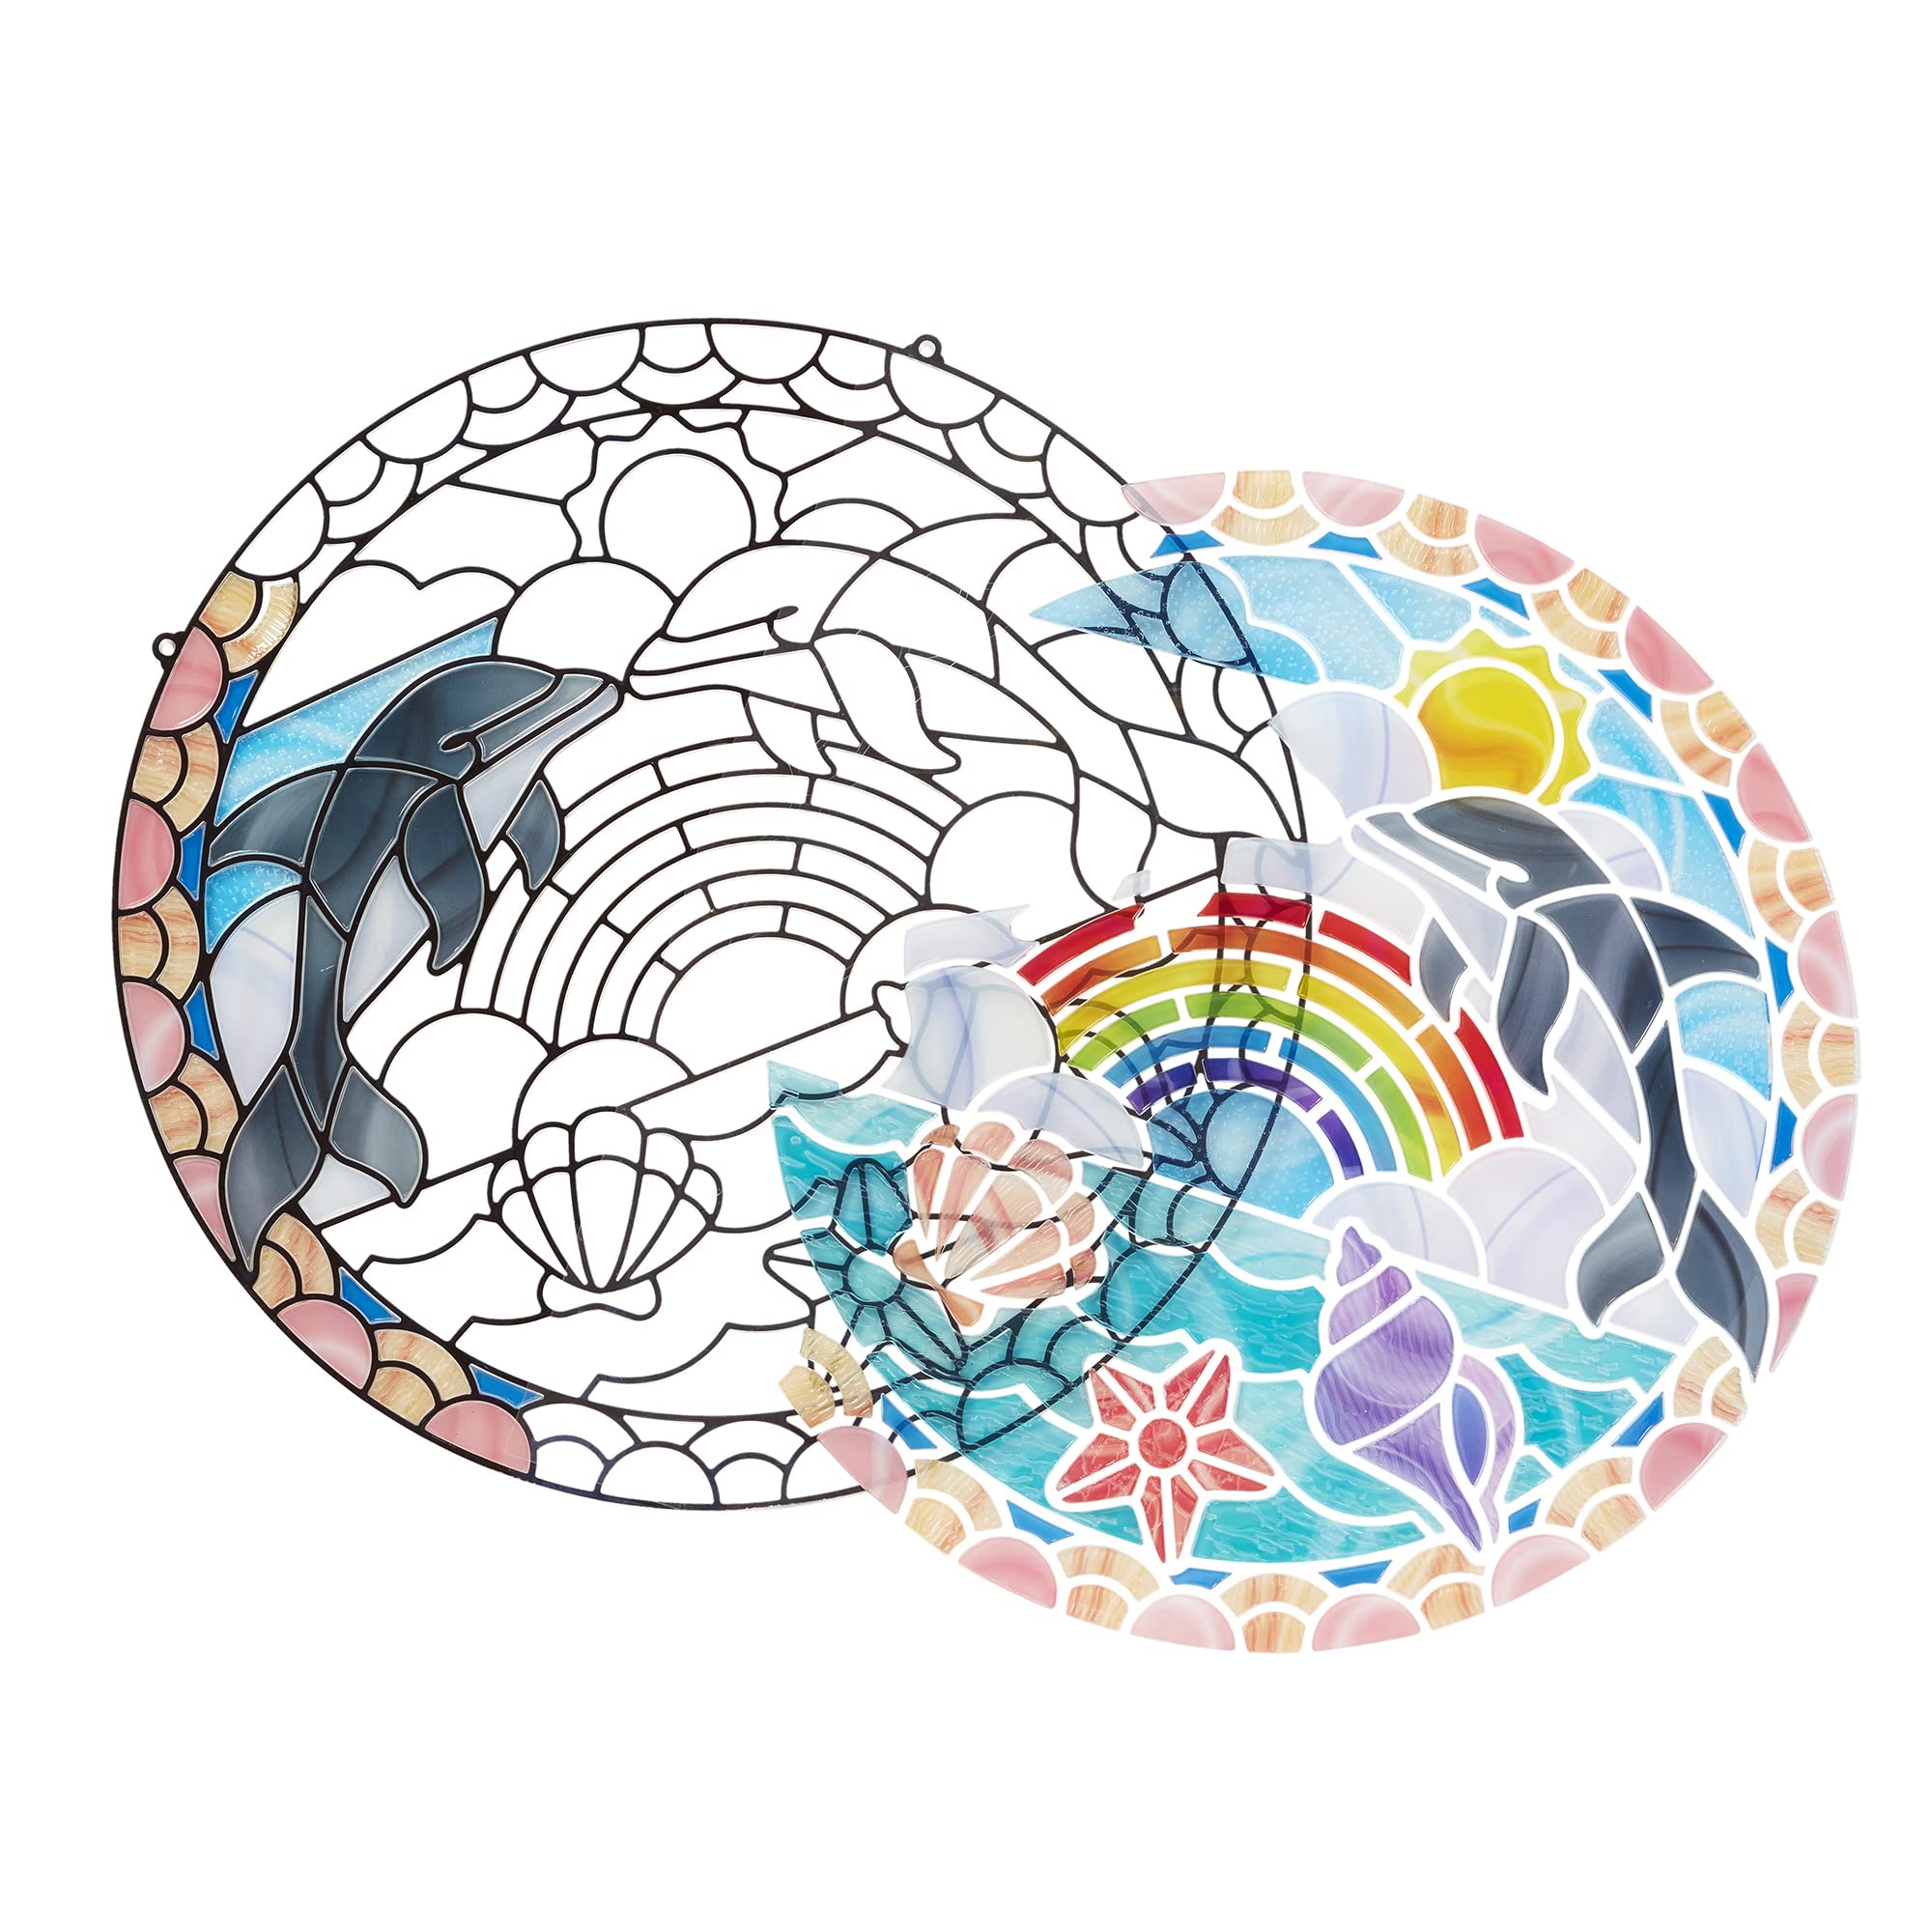 Melissa & Doug Stained Glass Made Easy Craft Kit: Dolphins - 180+ Stickers - Kids Sticker Stained Glass Craft Kit; Ocean Animals Crafts For Kids Ages 5+